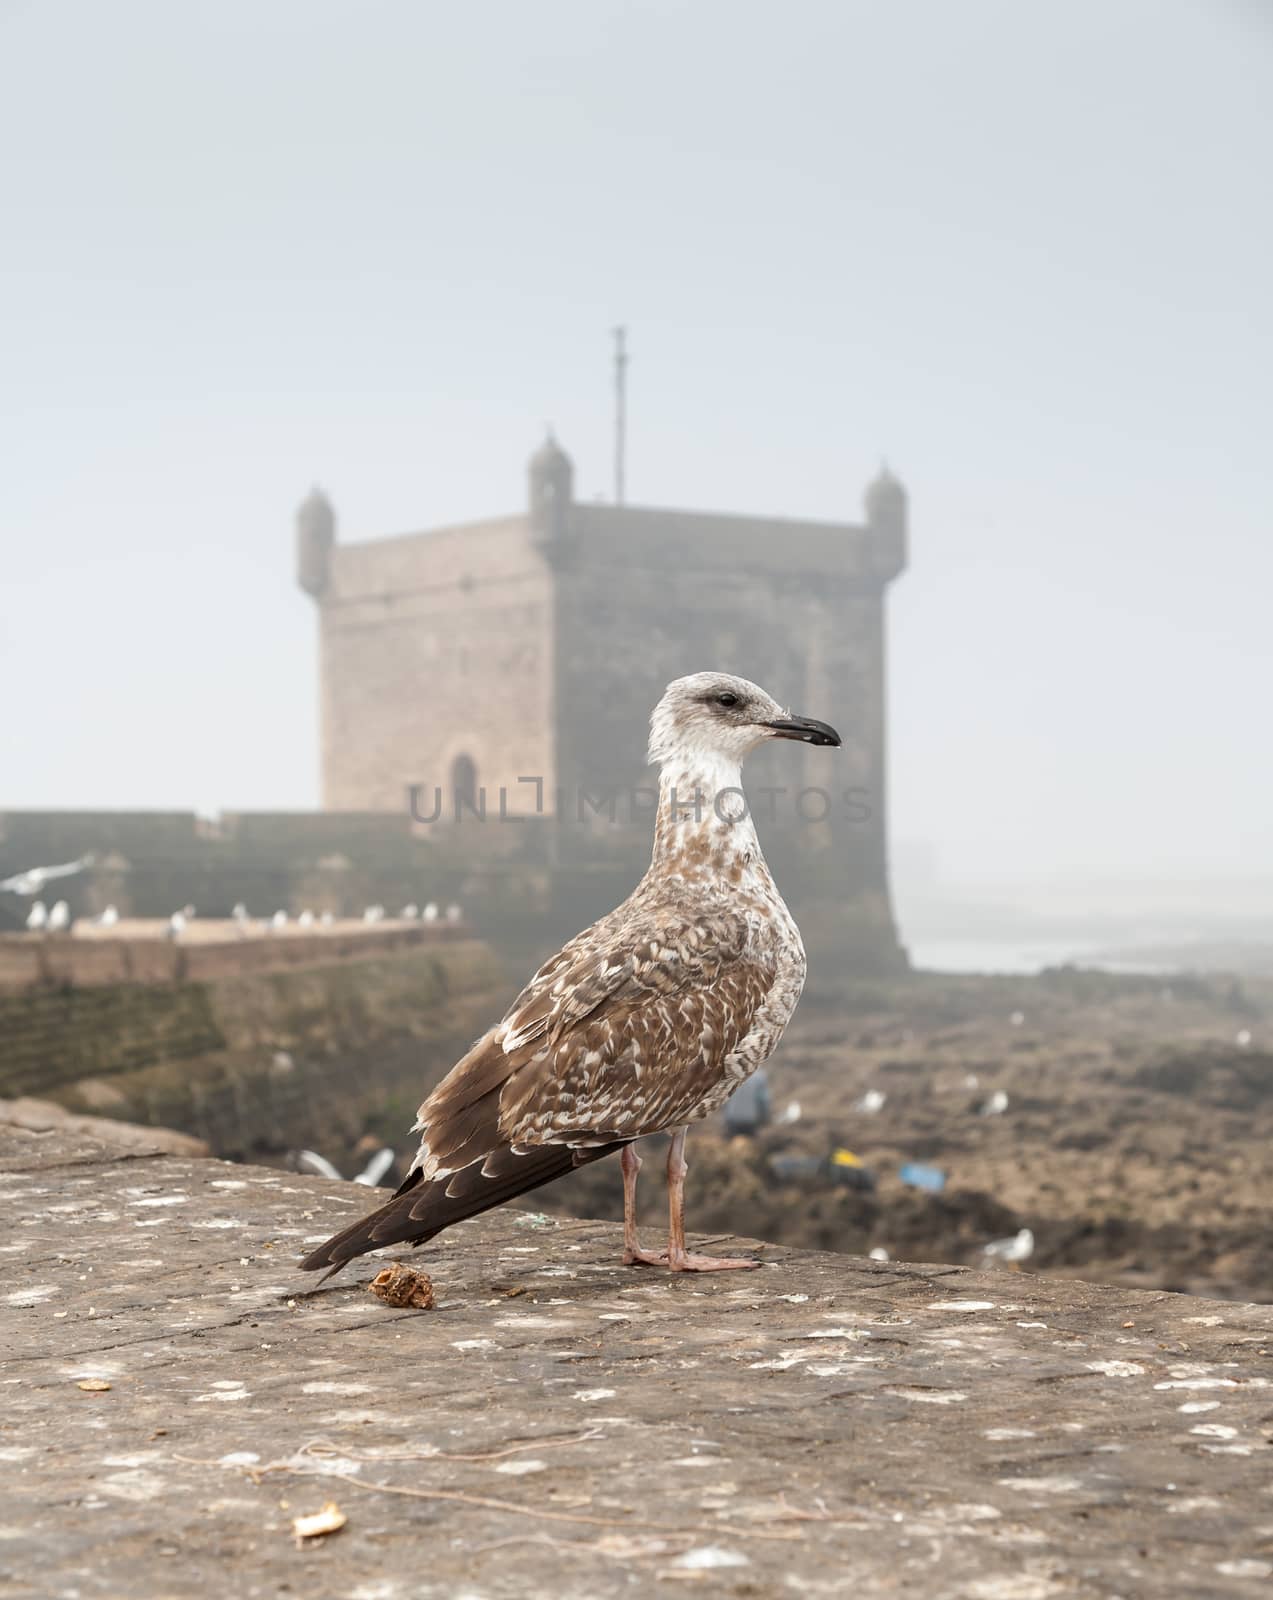 sea gull on background of the old fortress. Selective focus on the gull. 